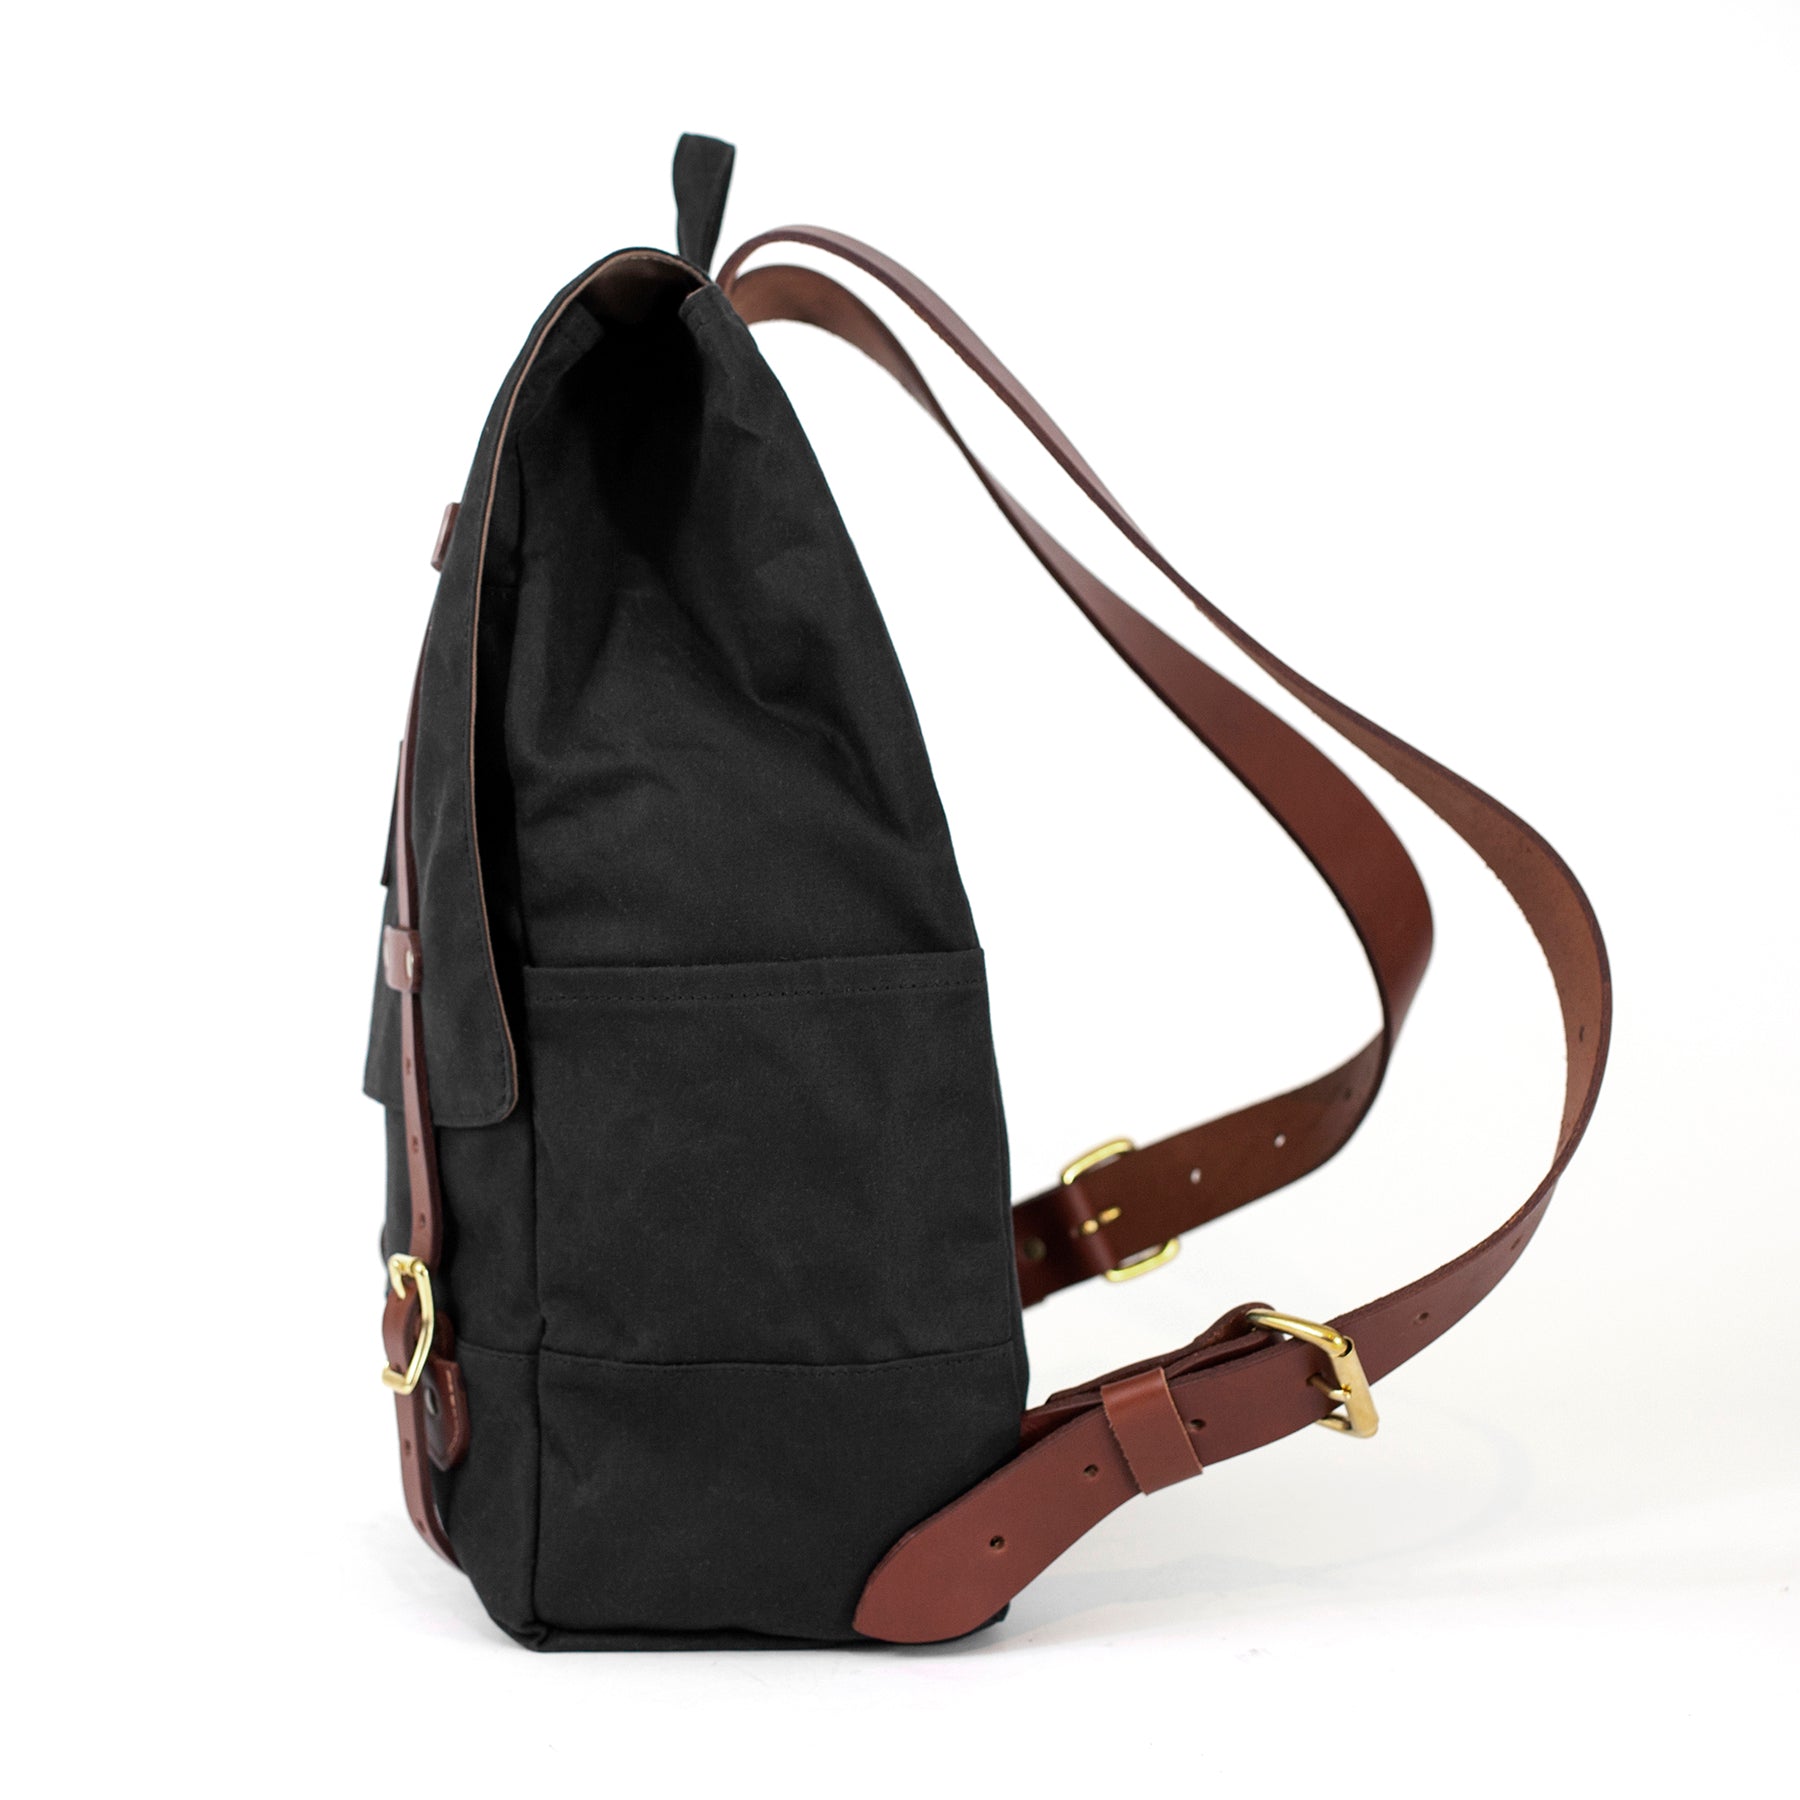 The Catamount Backpack - Black / Brown